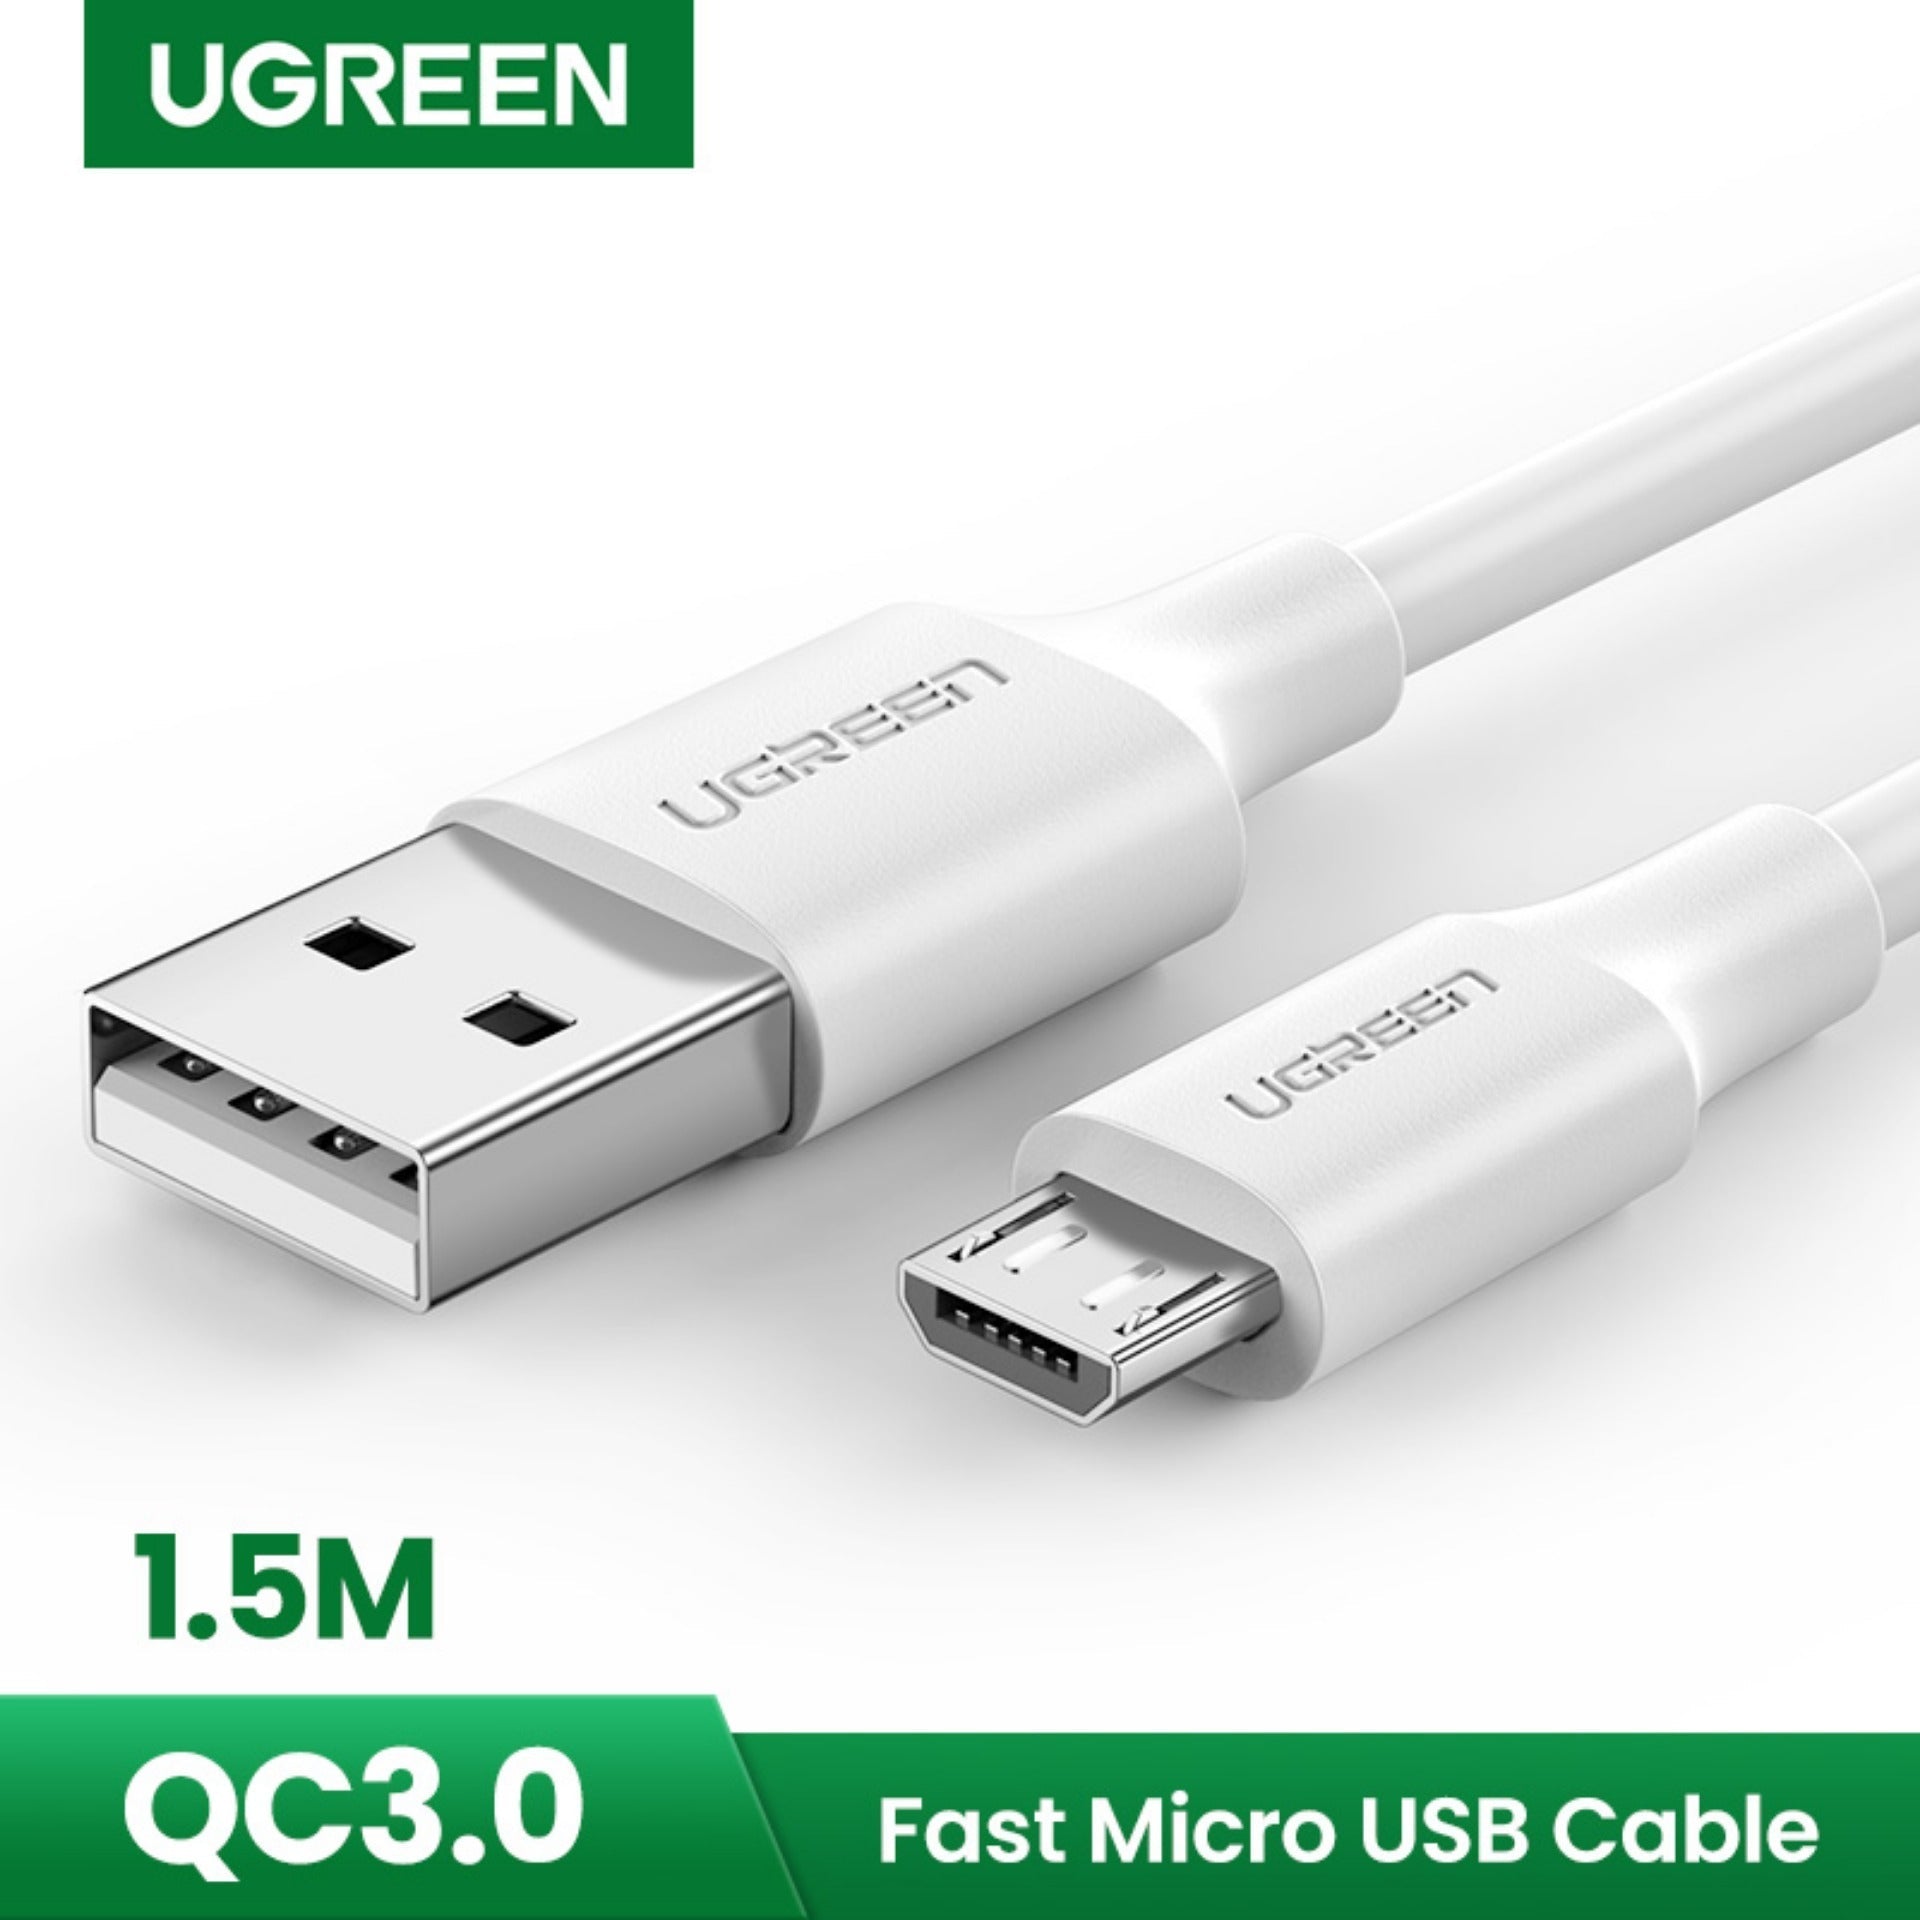 Ugreen US289 USB 2.0A to Micro USB Cable Nickel Plating 1.5M - Black